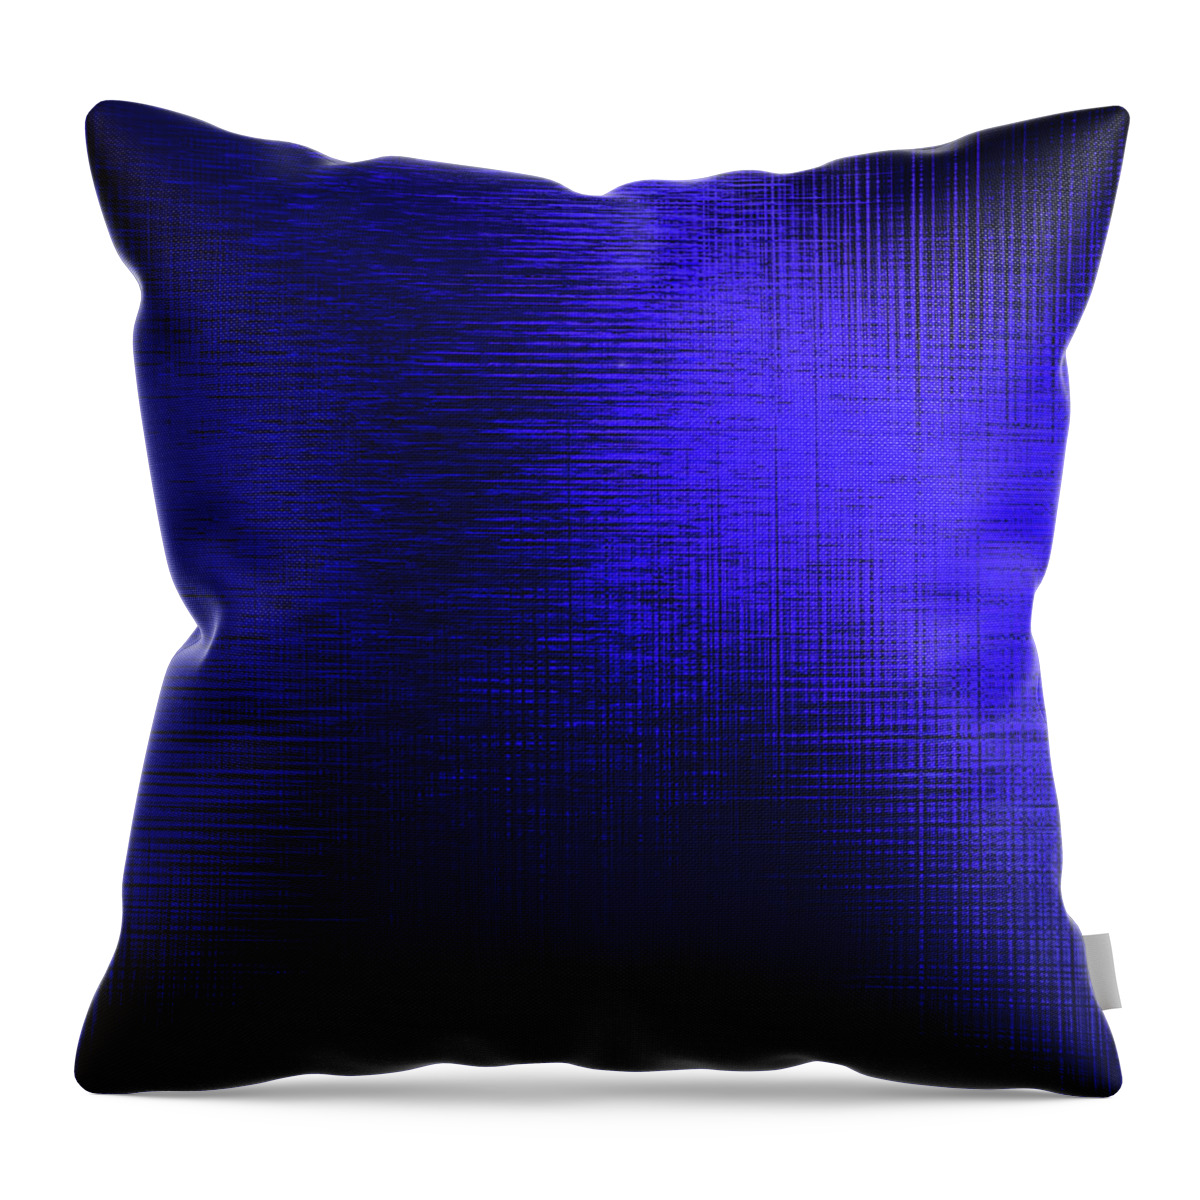 Abstract Throw Pillow featuring the digital art Supplication 4 by Gina Harrison